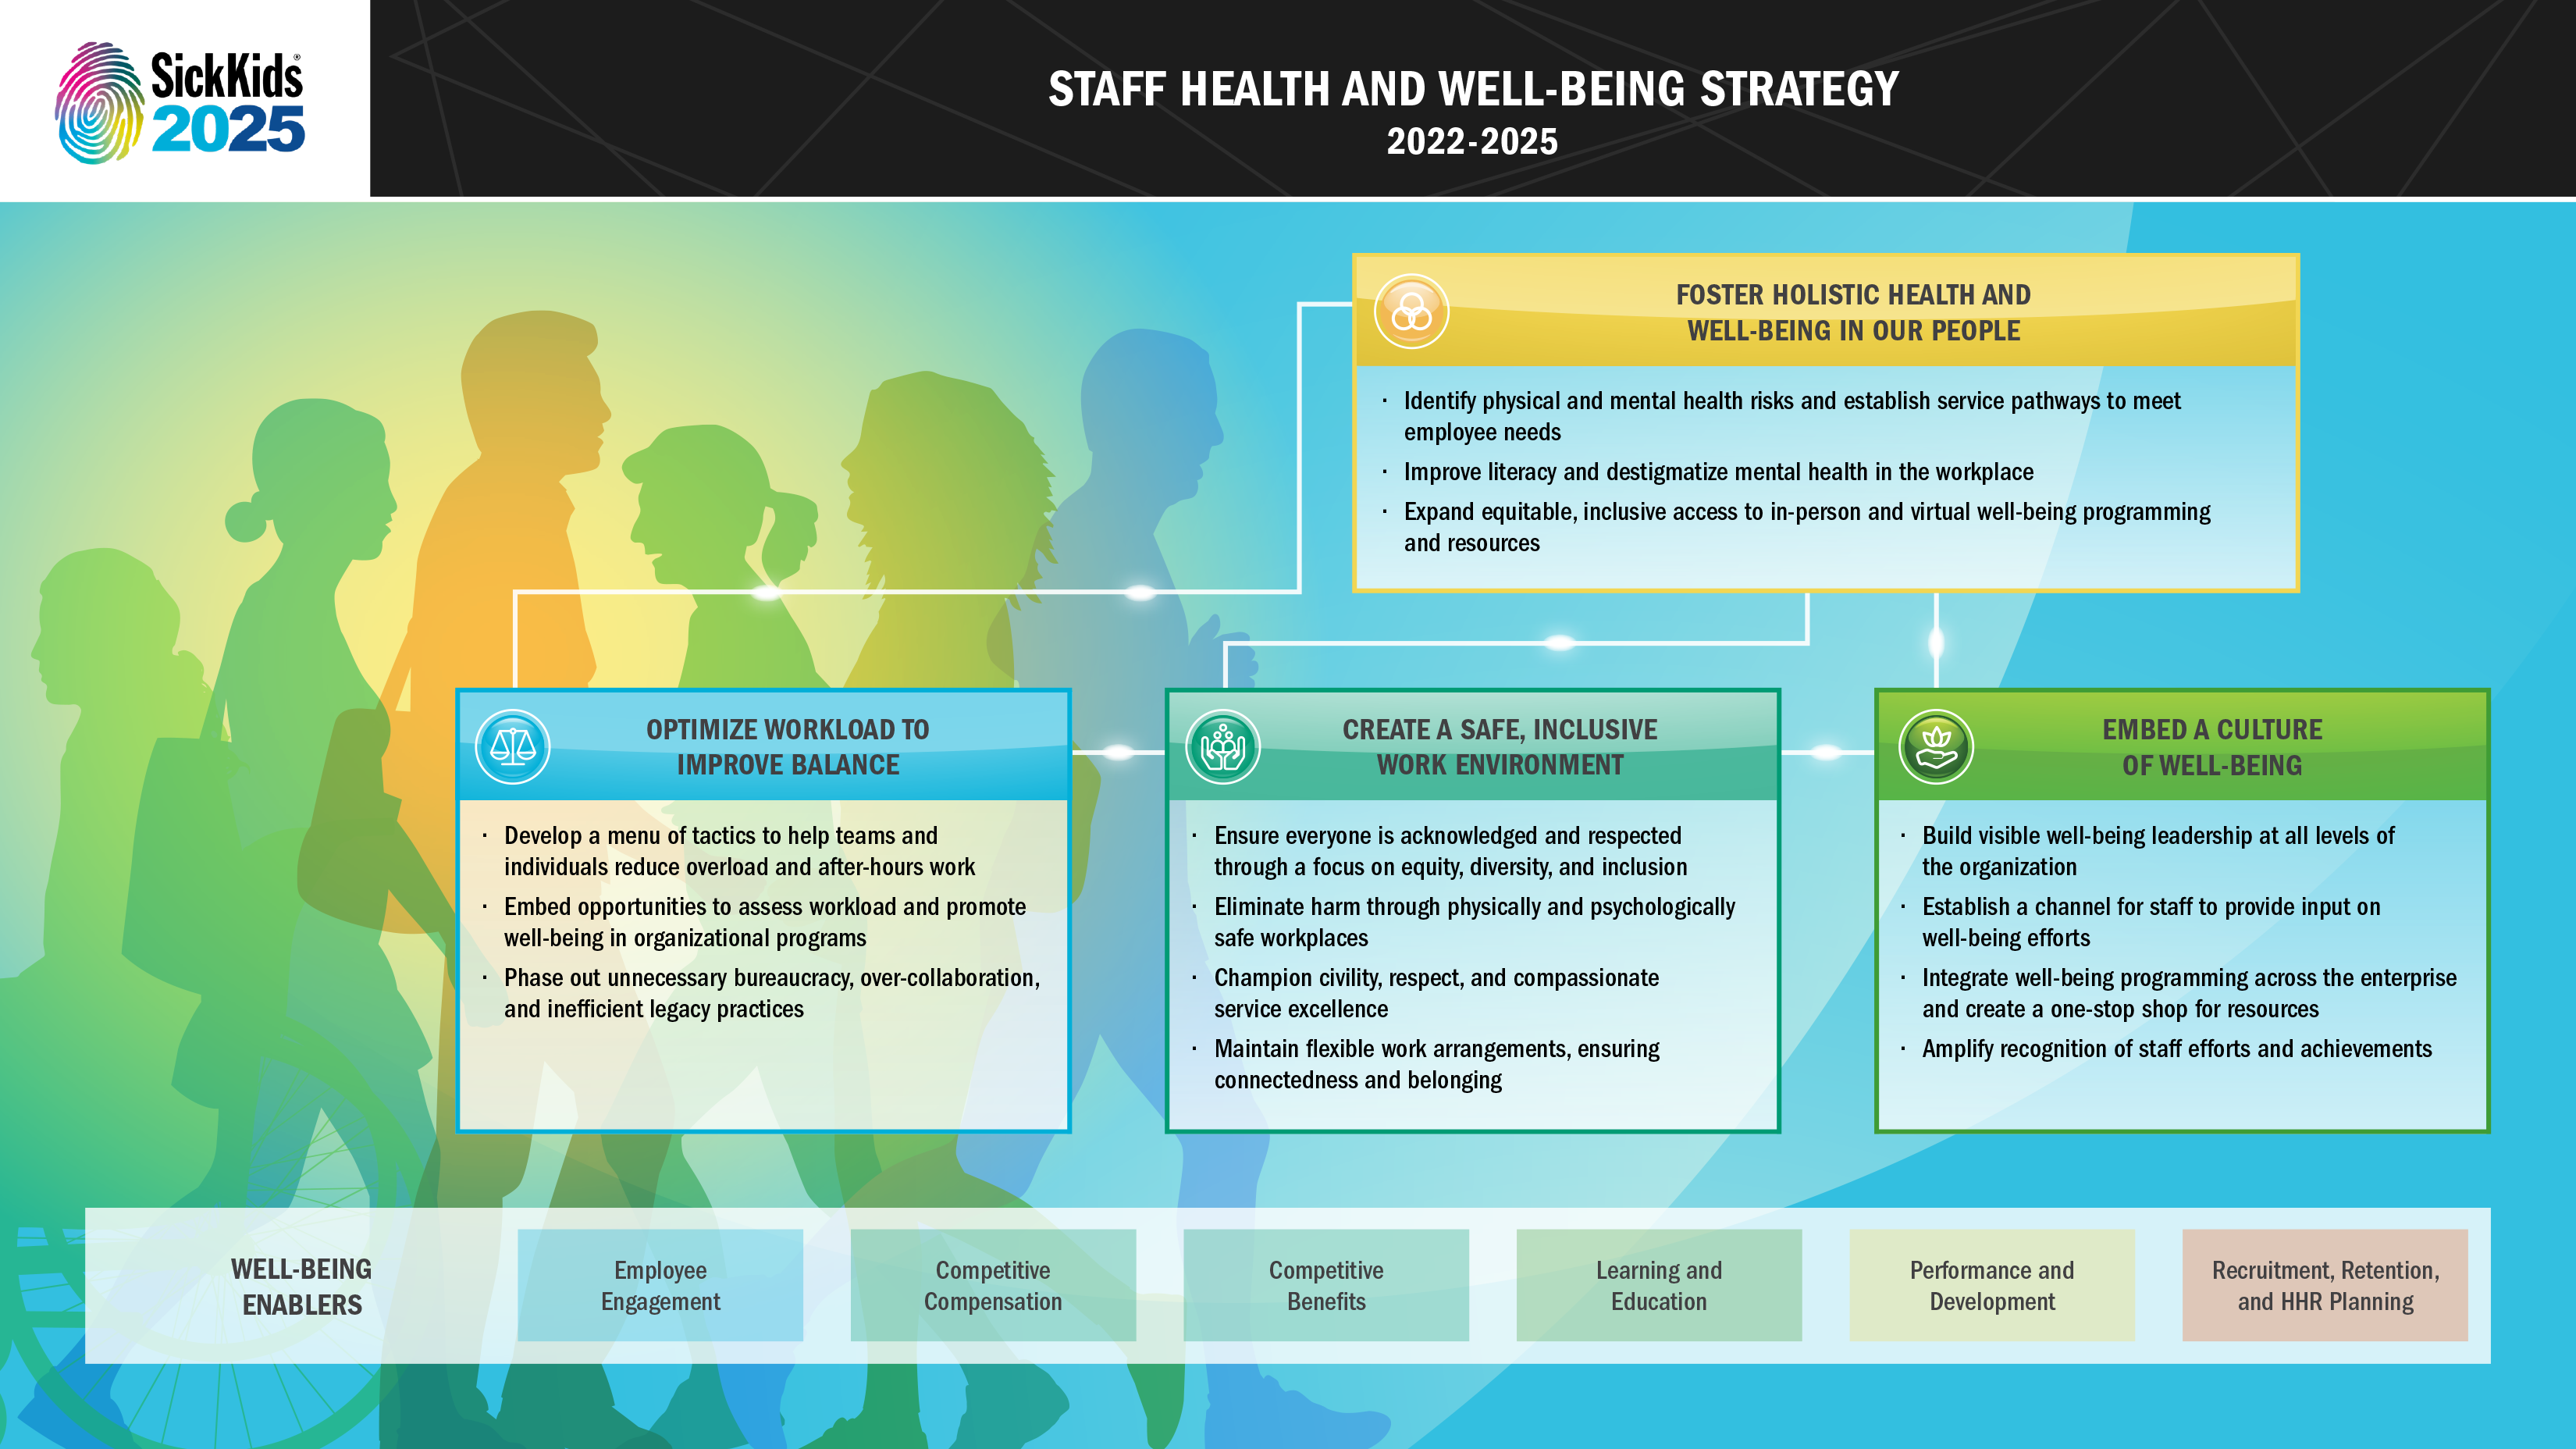 View a PDF of the Staff Health and Well-being strategy map